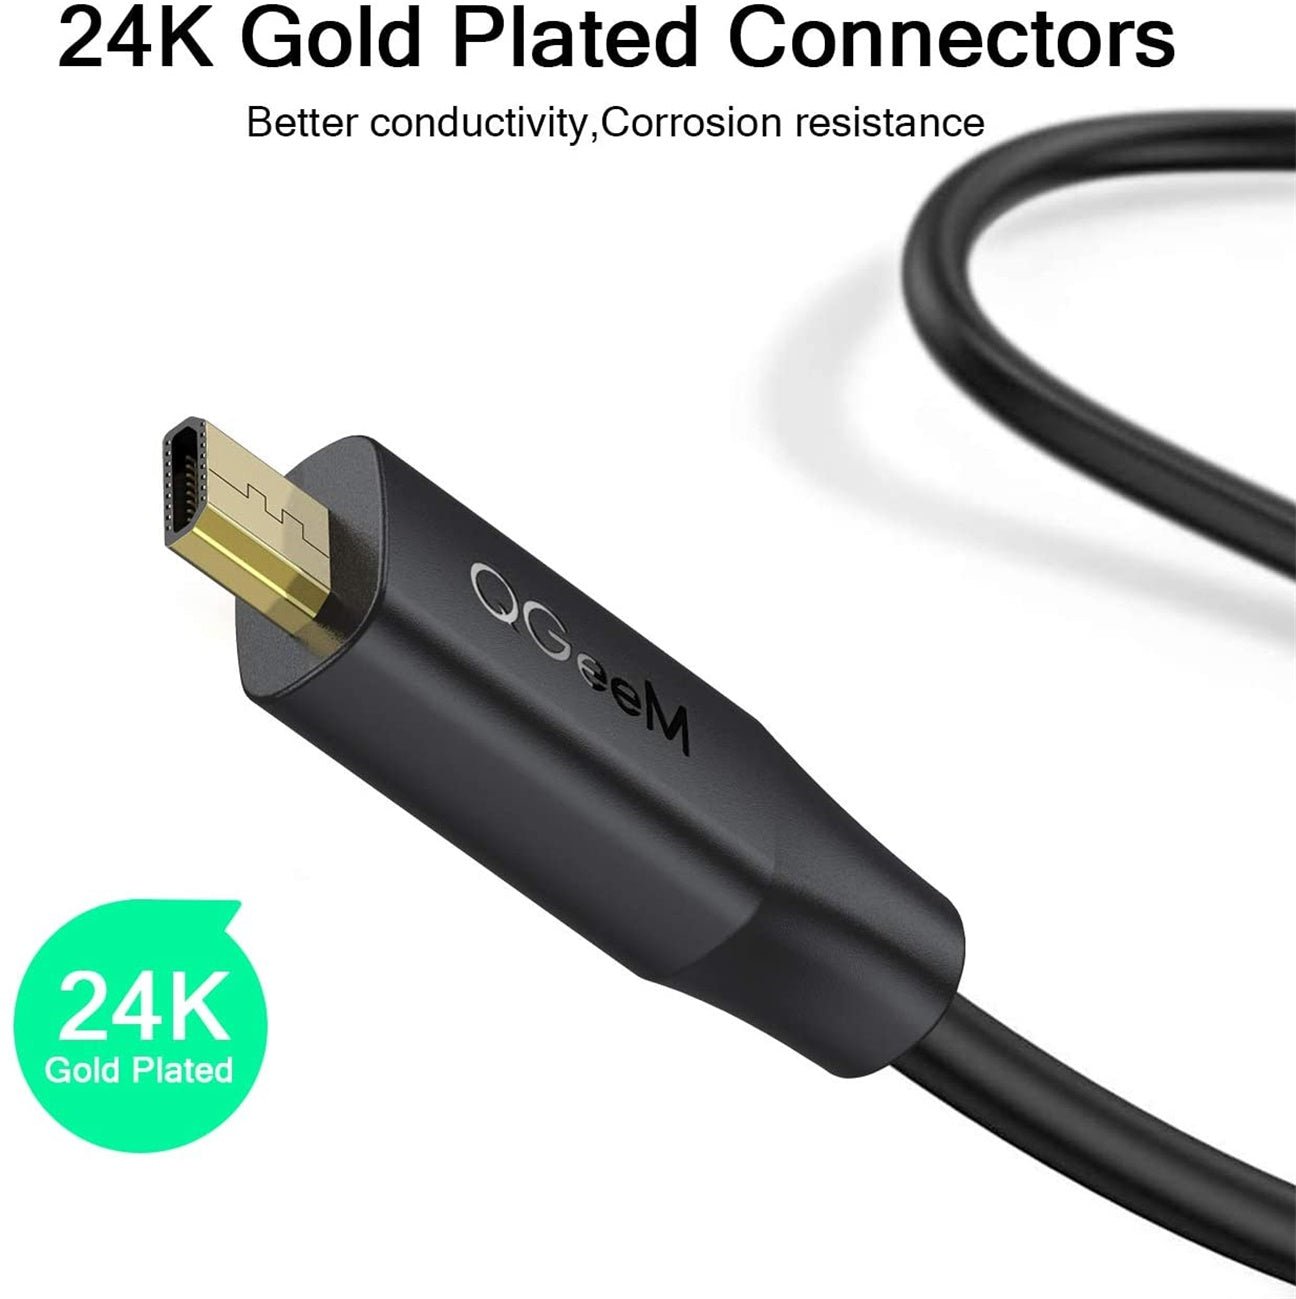 QGEEM HDMI Cable HDMI to HDMI 2.0 Cable 4K for Xiaomi Projector